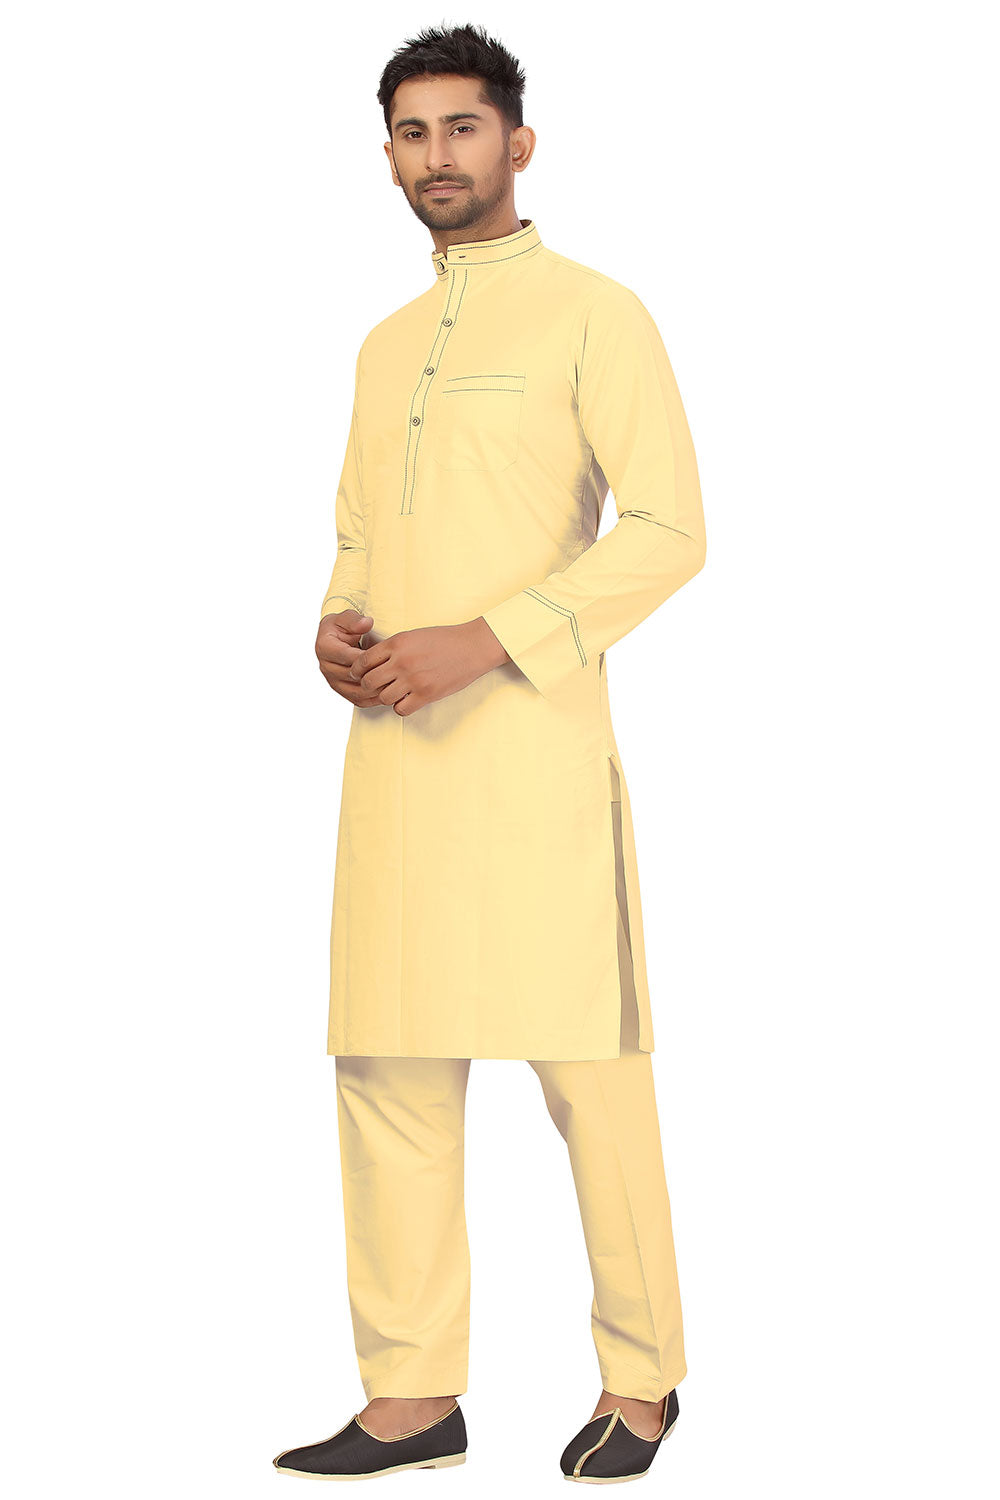 Buy Men's Blended Cotton Solid Pathani Set in Yellow Online